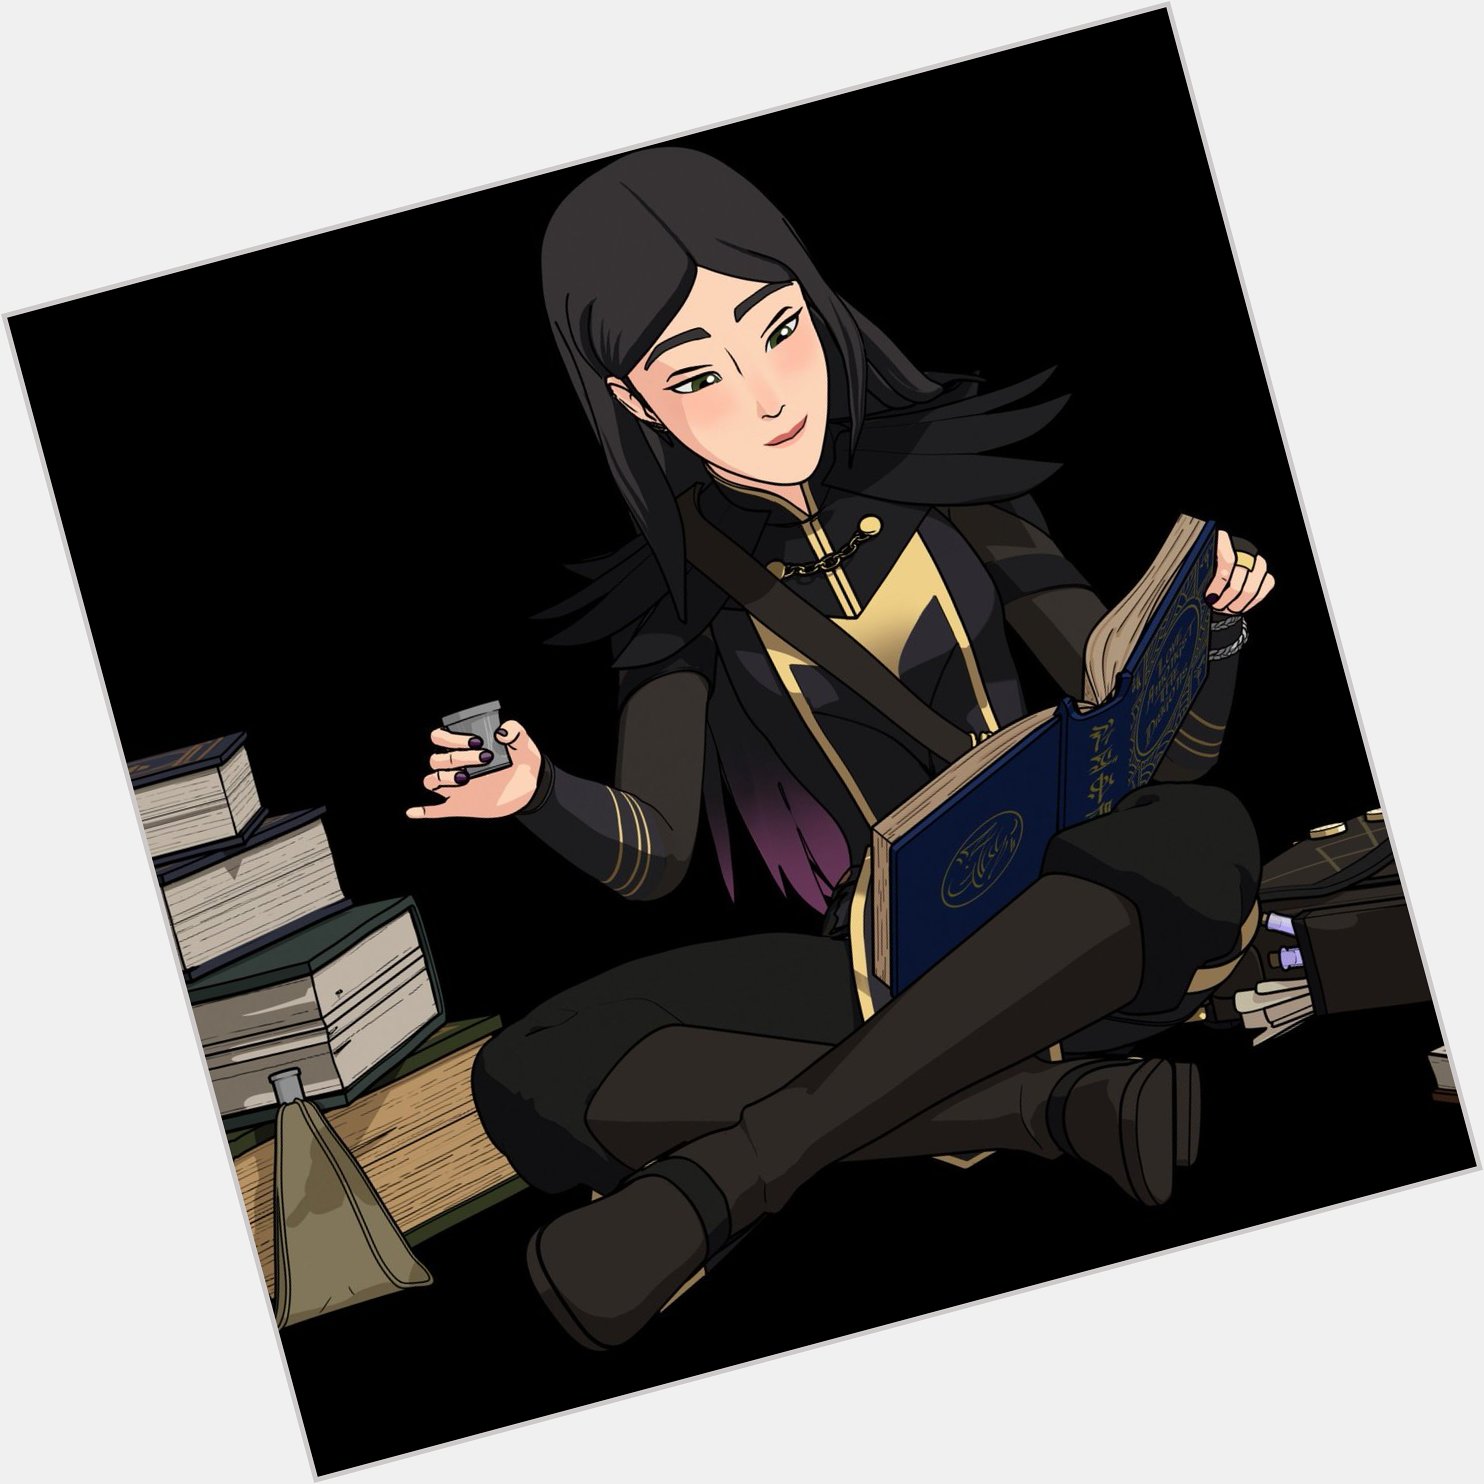 Happy birthday to my favorite Dragon Prince character, Claudia! She deserves nothing but love and peace! 